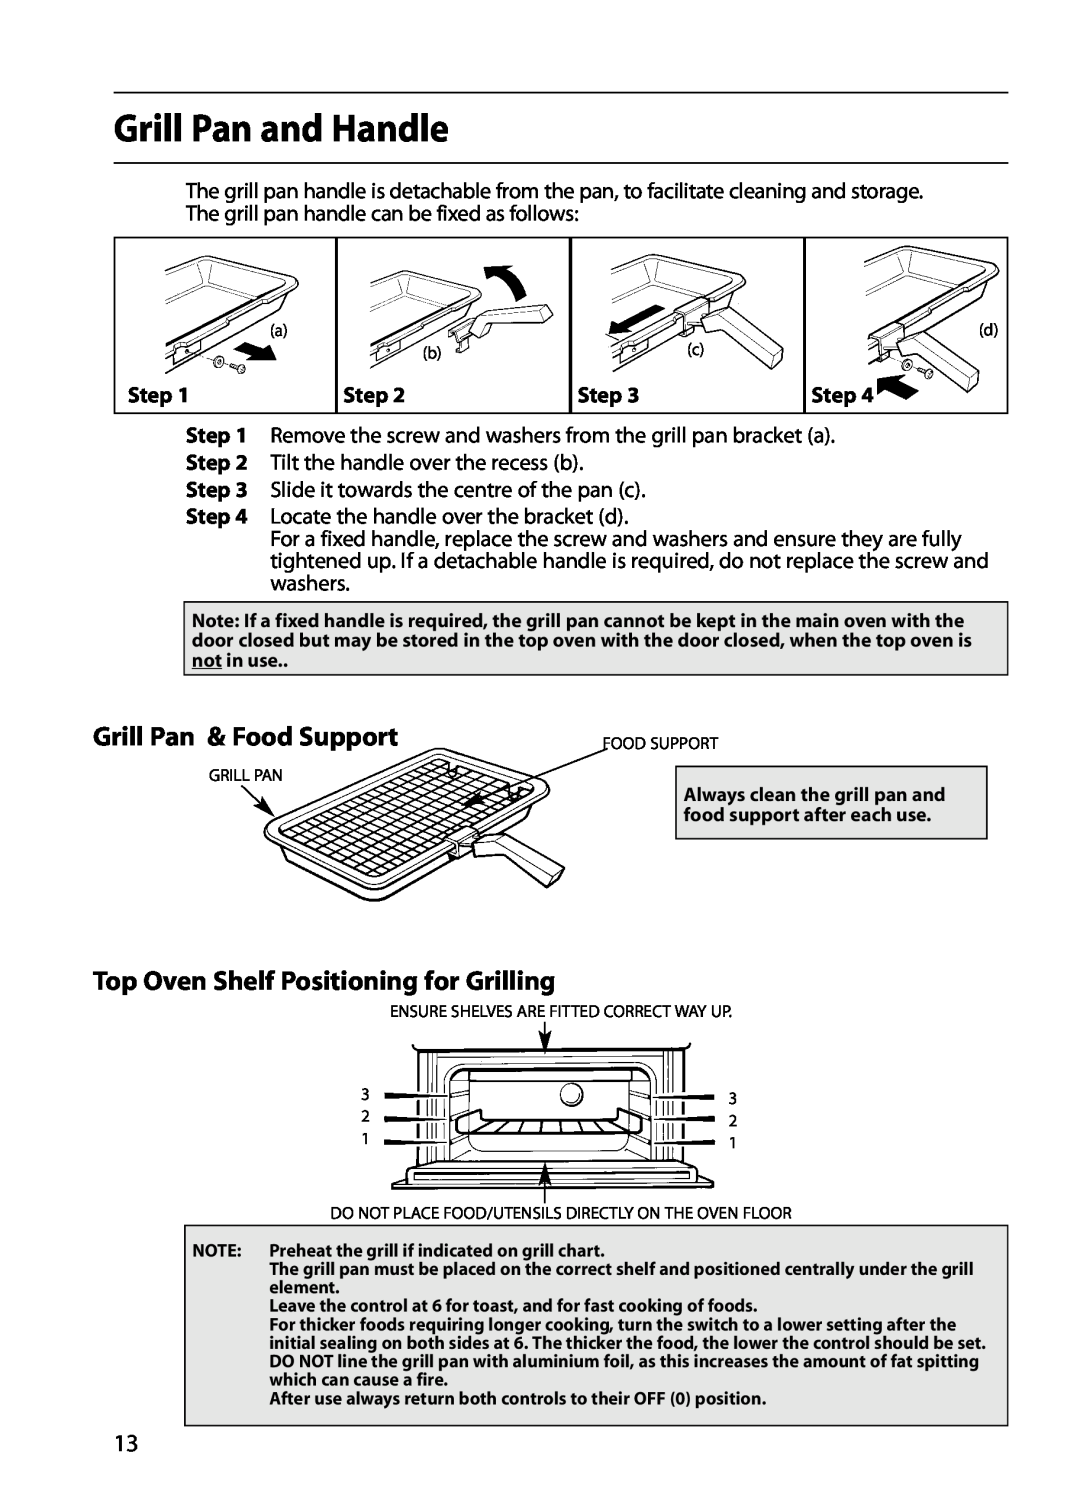 Hotpoint S130E manual Grill Pan and Handle, Top Oven Shelf Positioning for Grilling, Grill Pan & Food Support, Step 